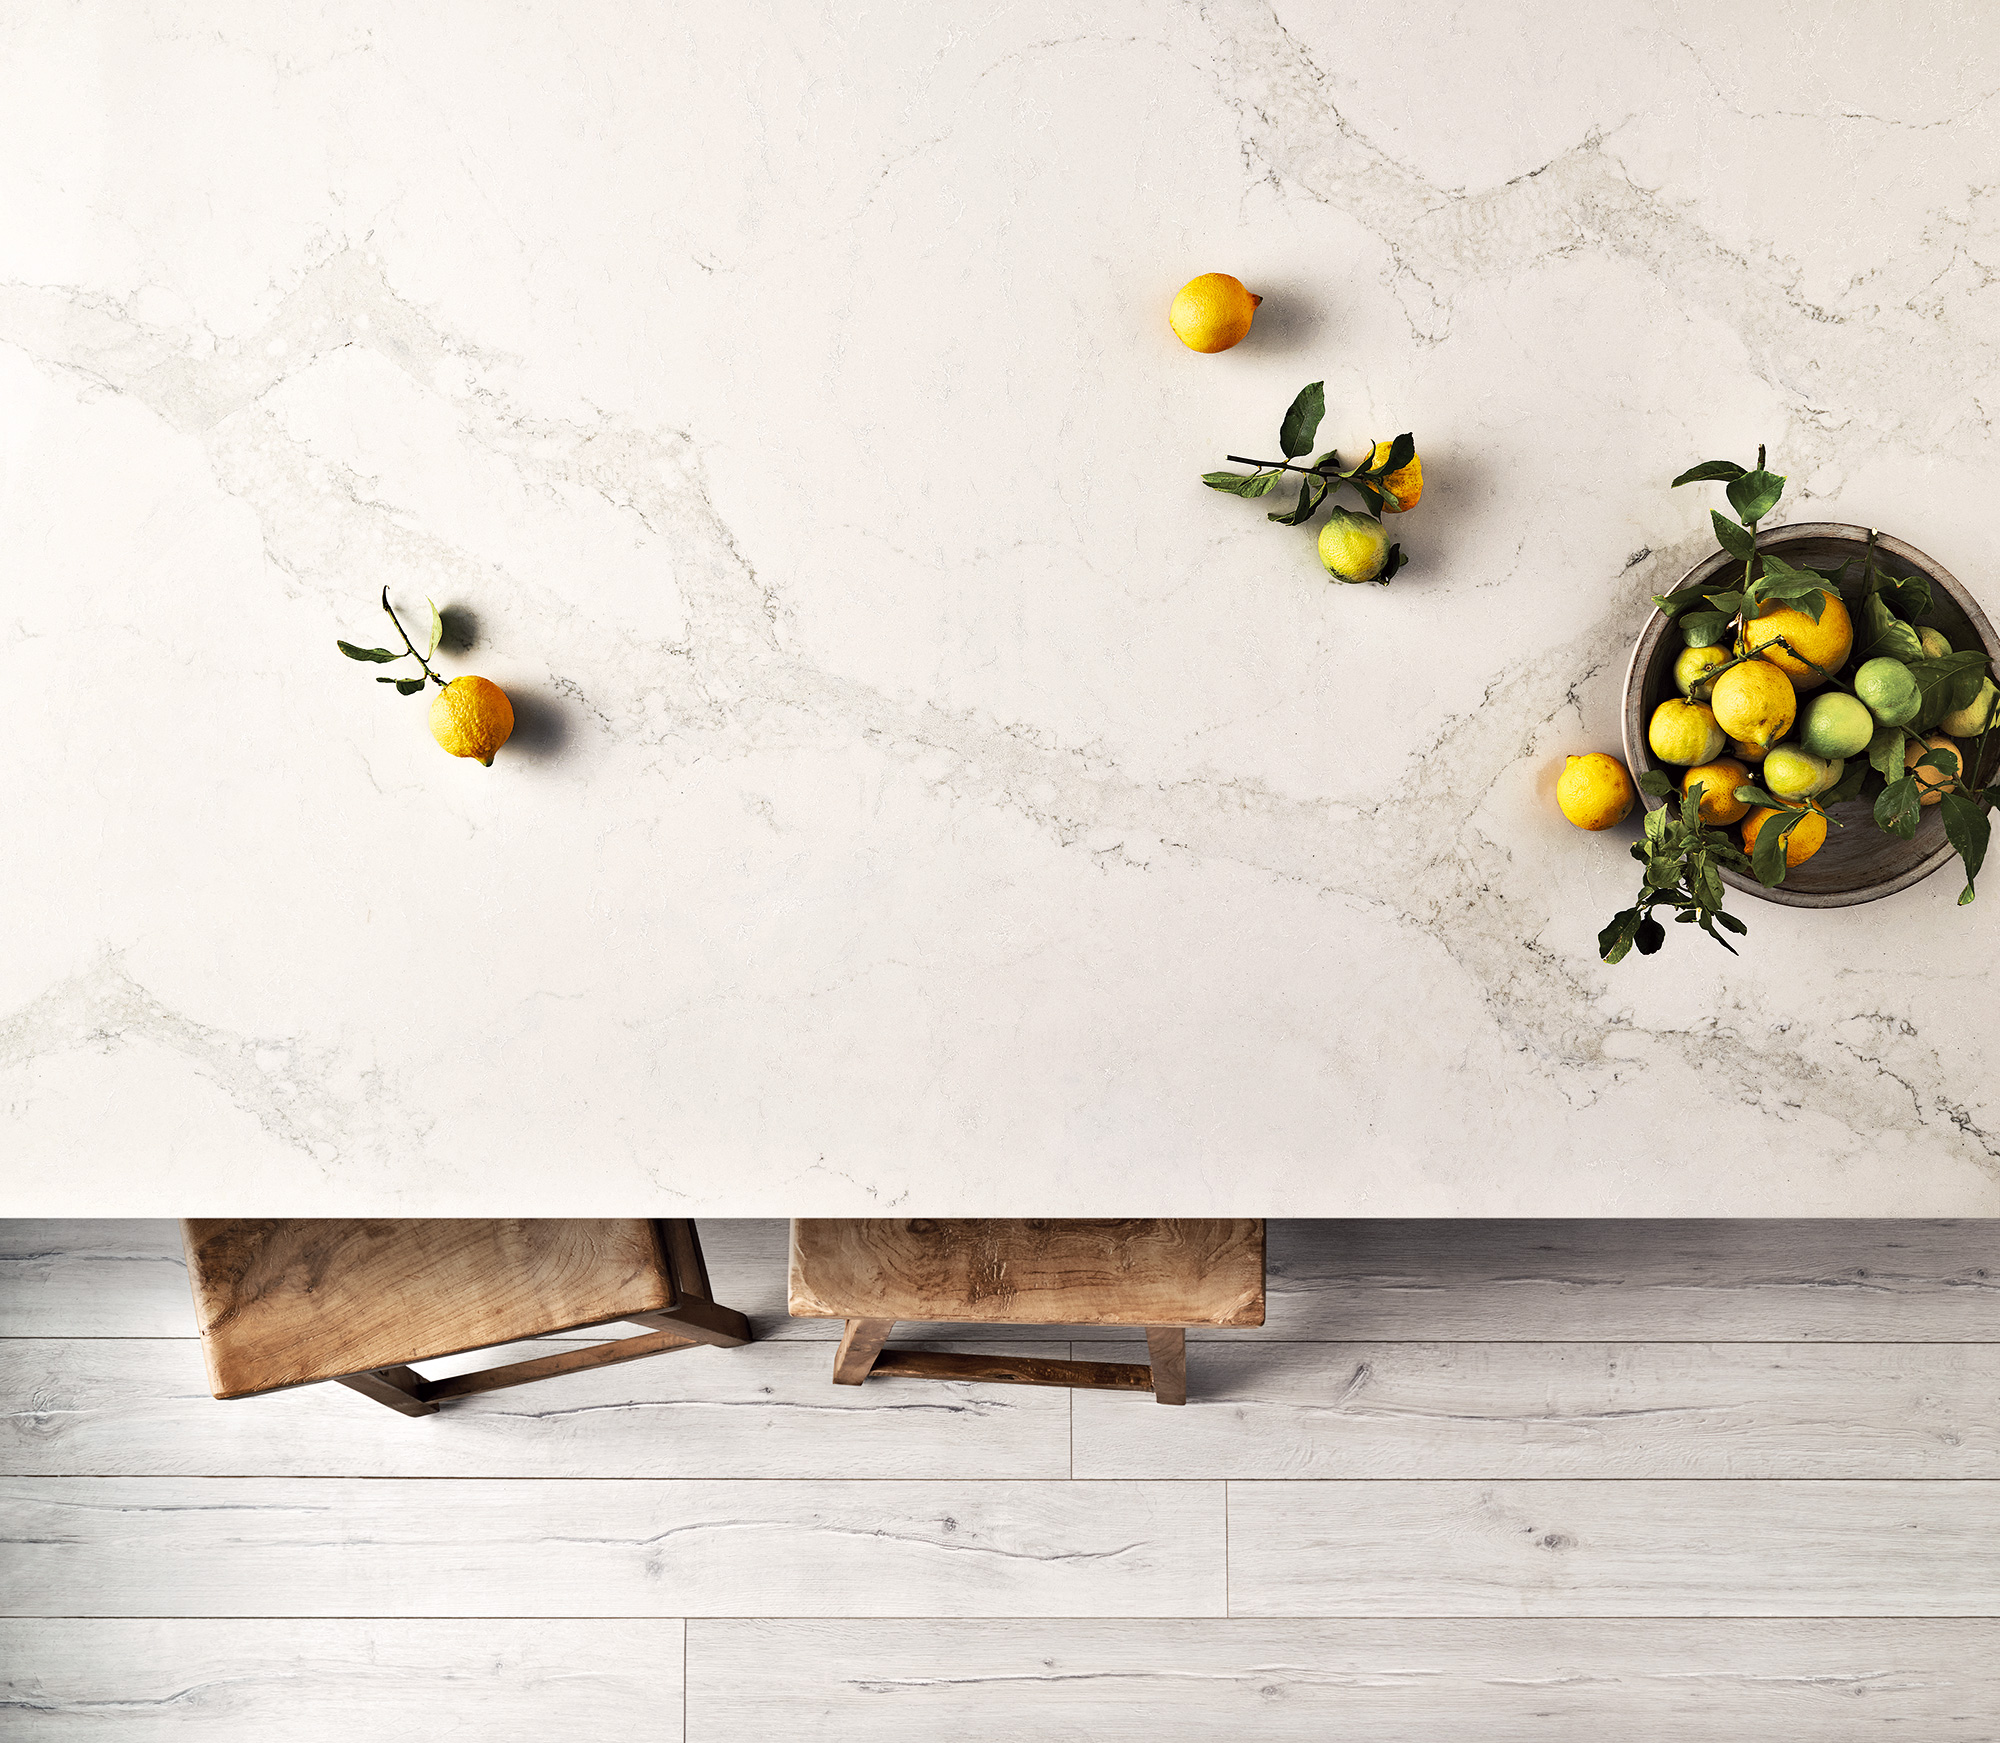 18 Caesarstone Surfaces for a Modern Environment